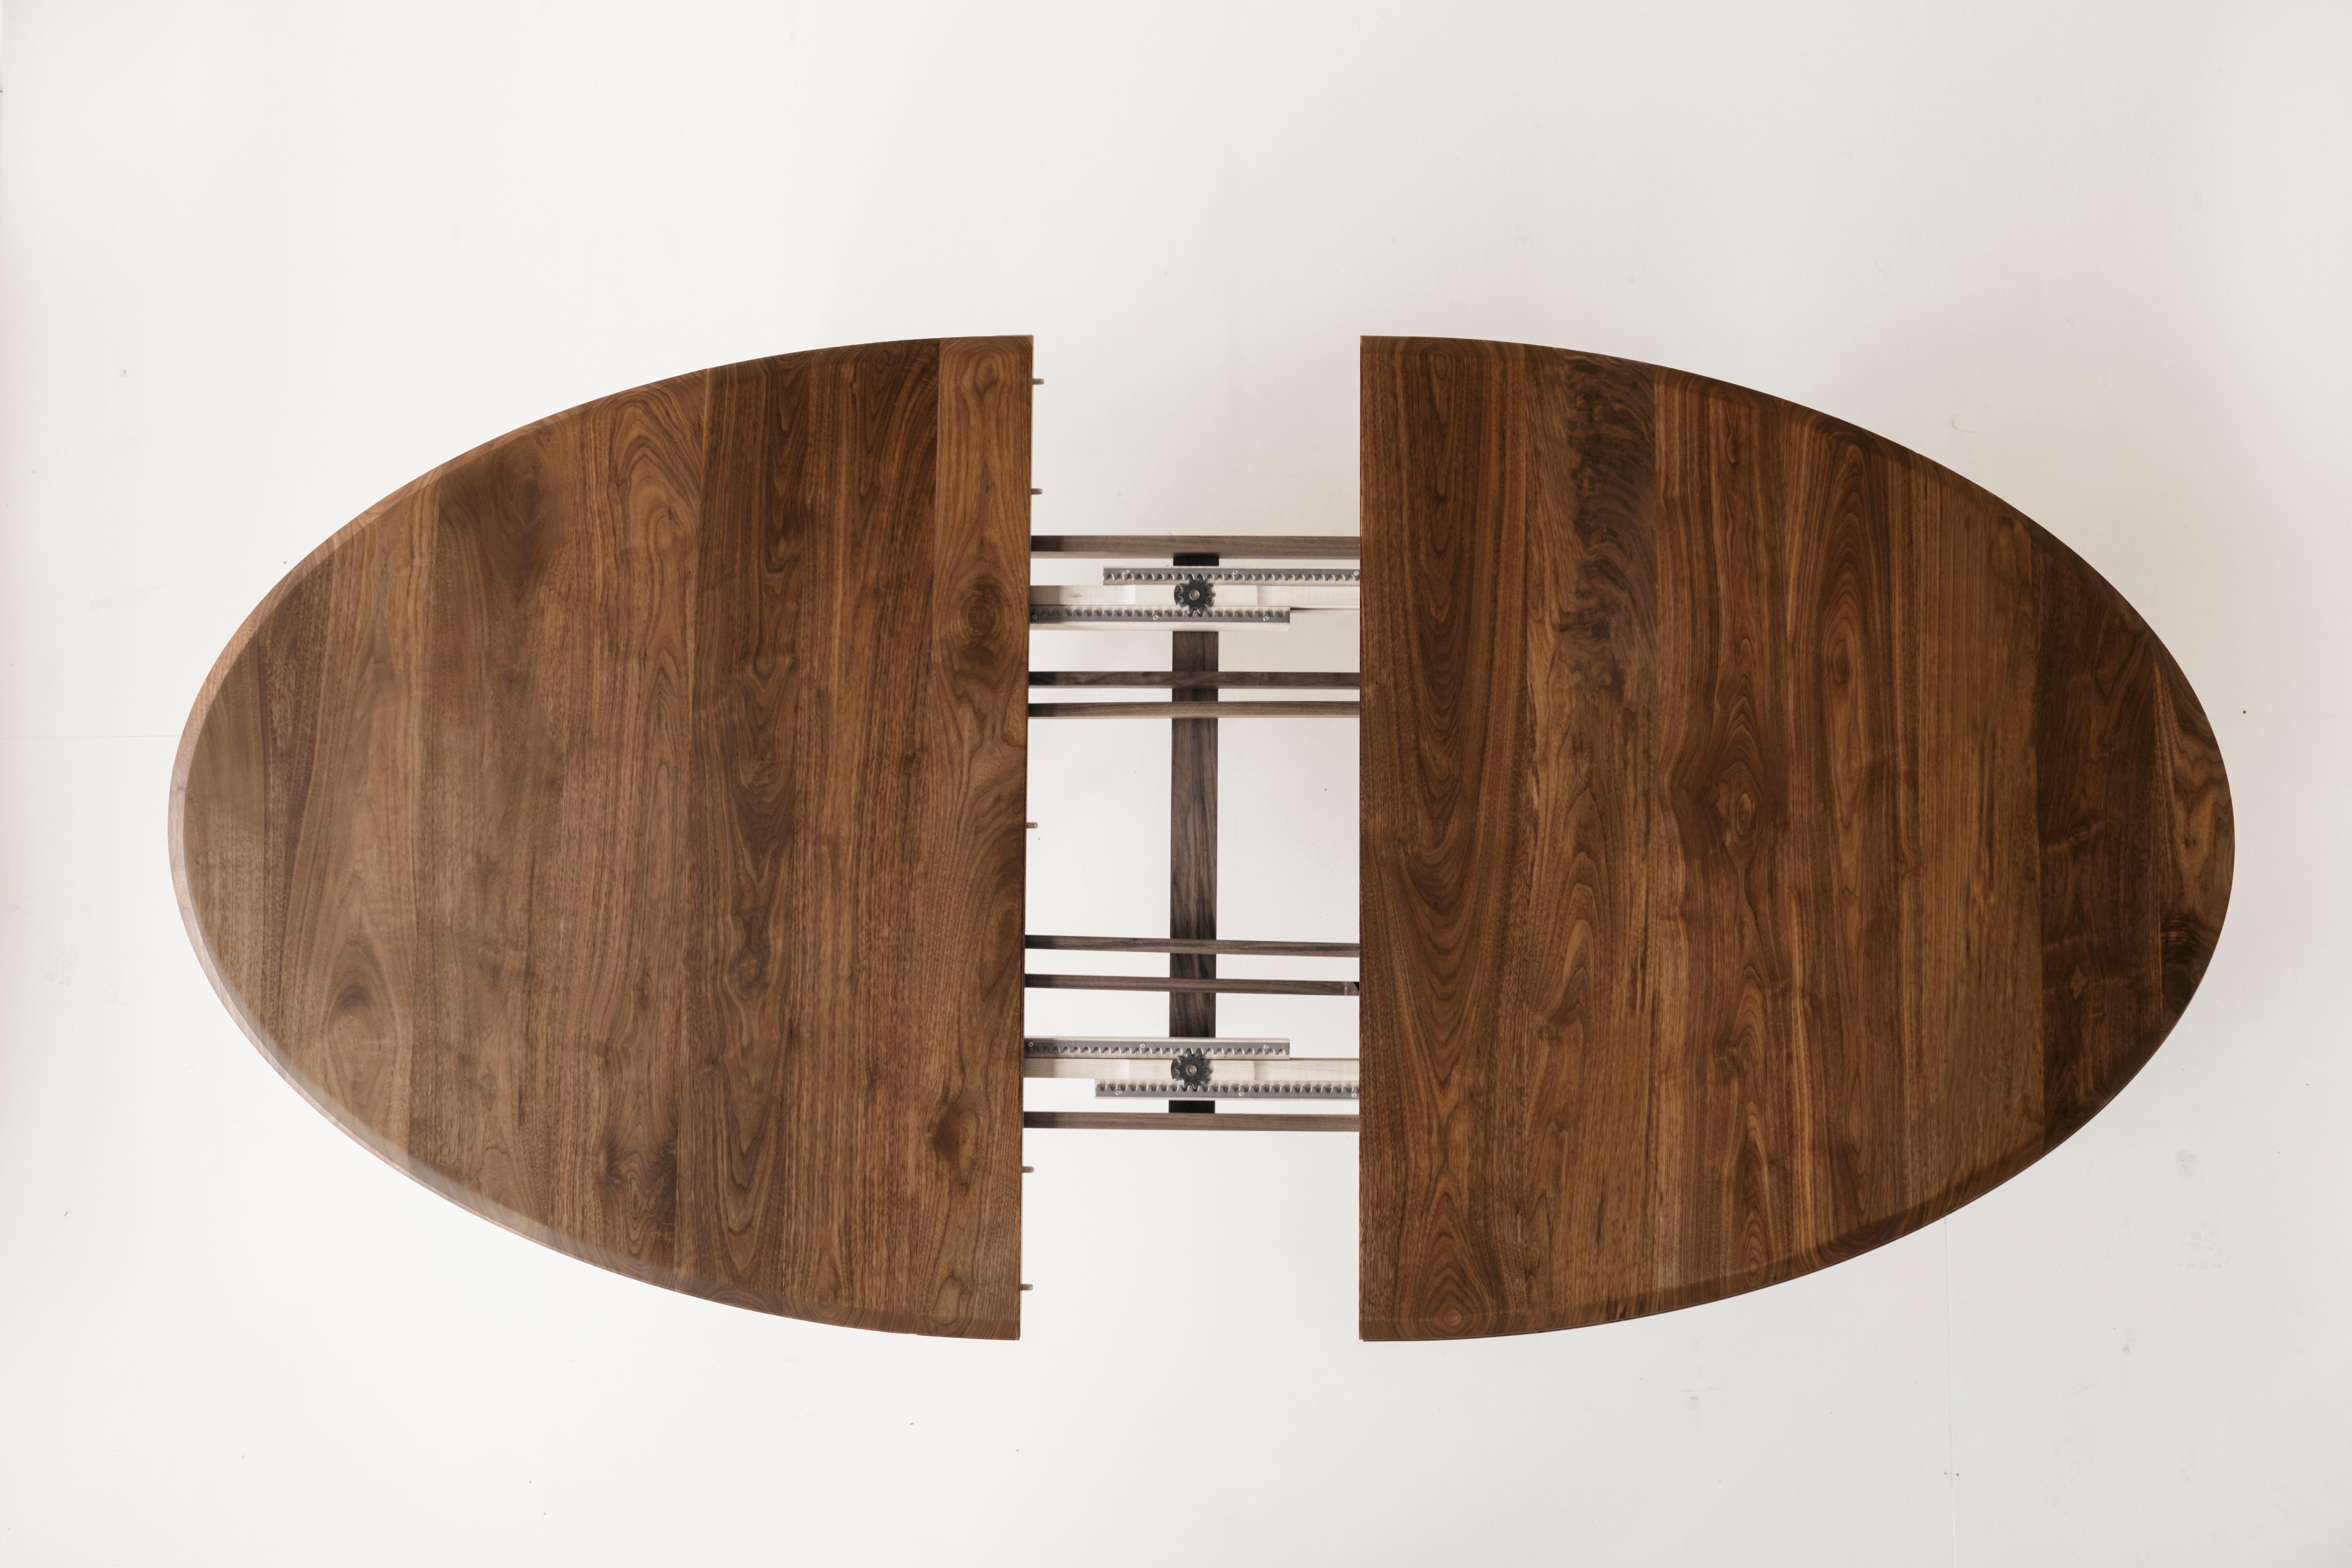 extendable oval dining table